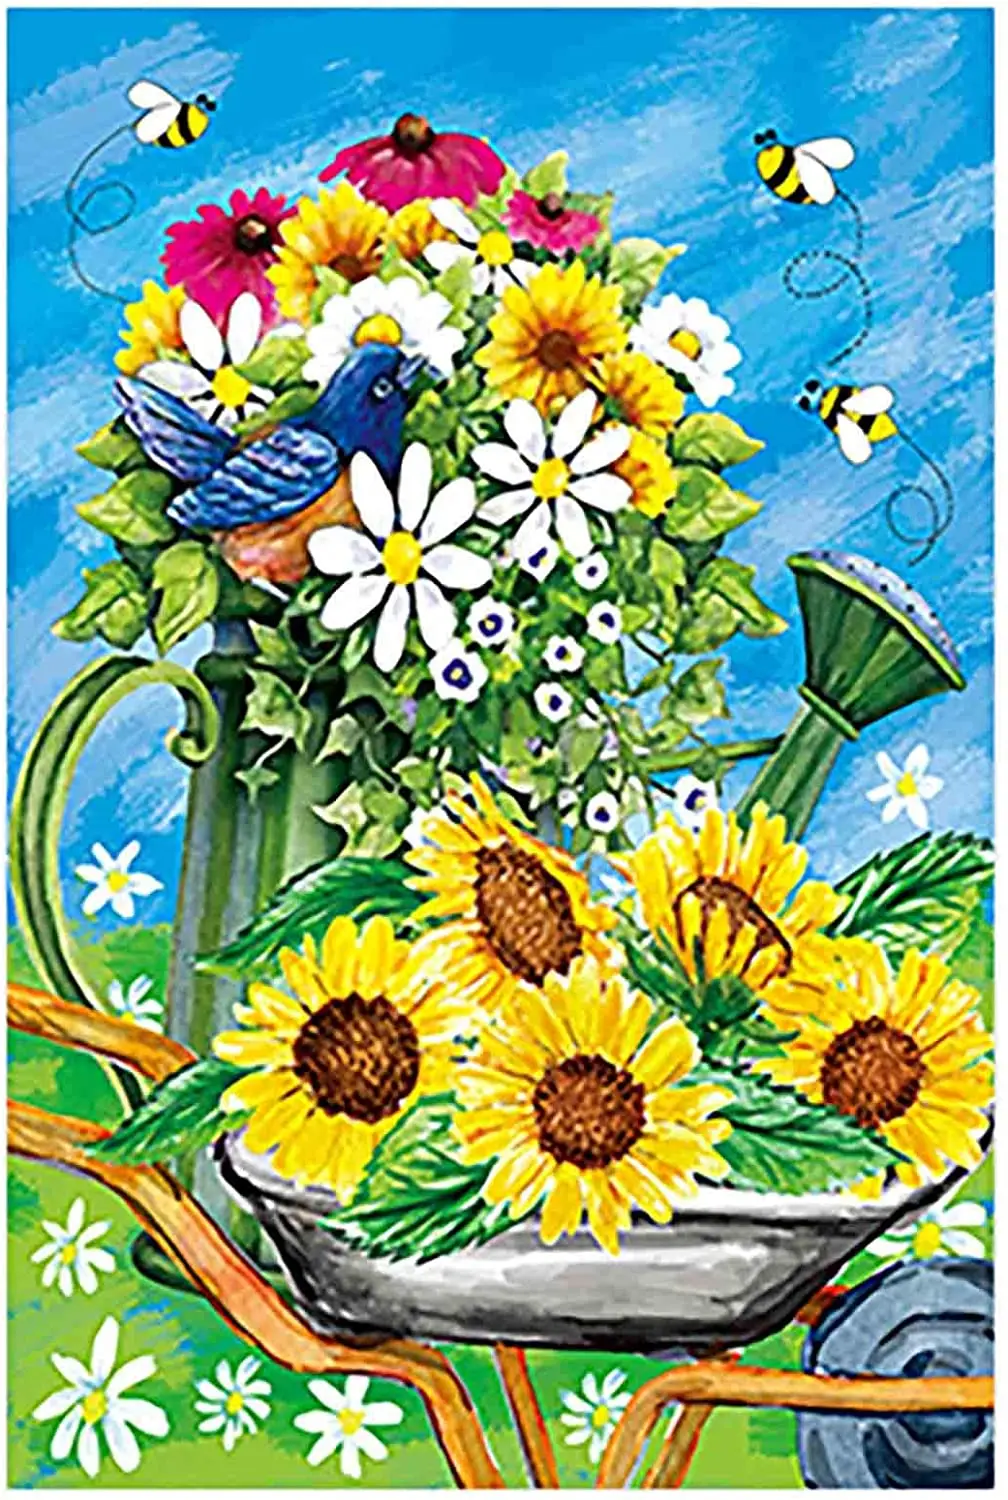 

Spring Summer Bees Flowers Double Sided Sunflower Daisy Garden Yard Flag Banner for Outside House Yard Home Decorative